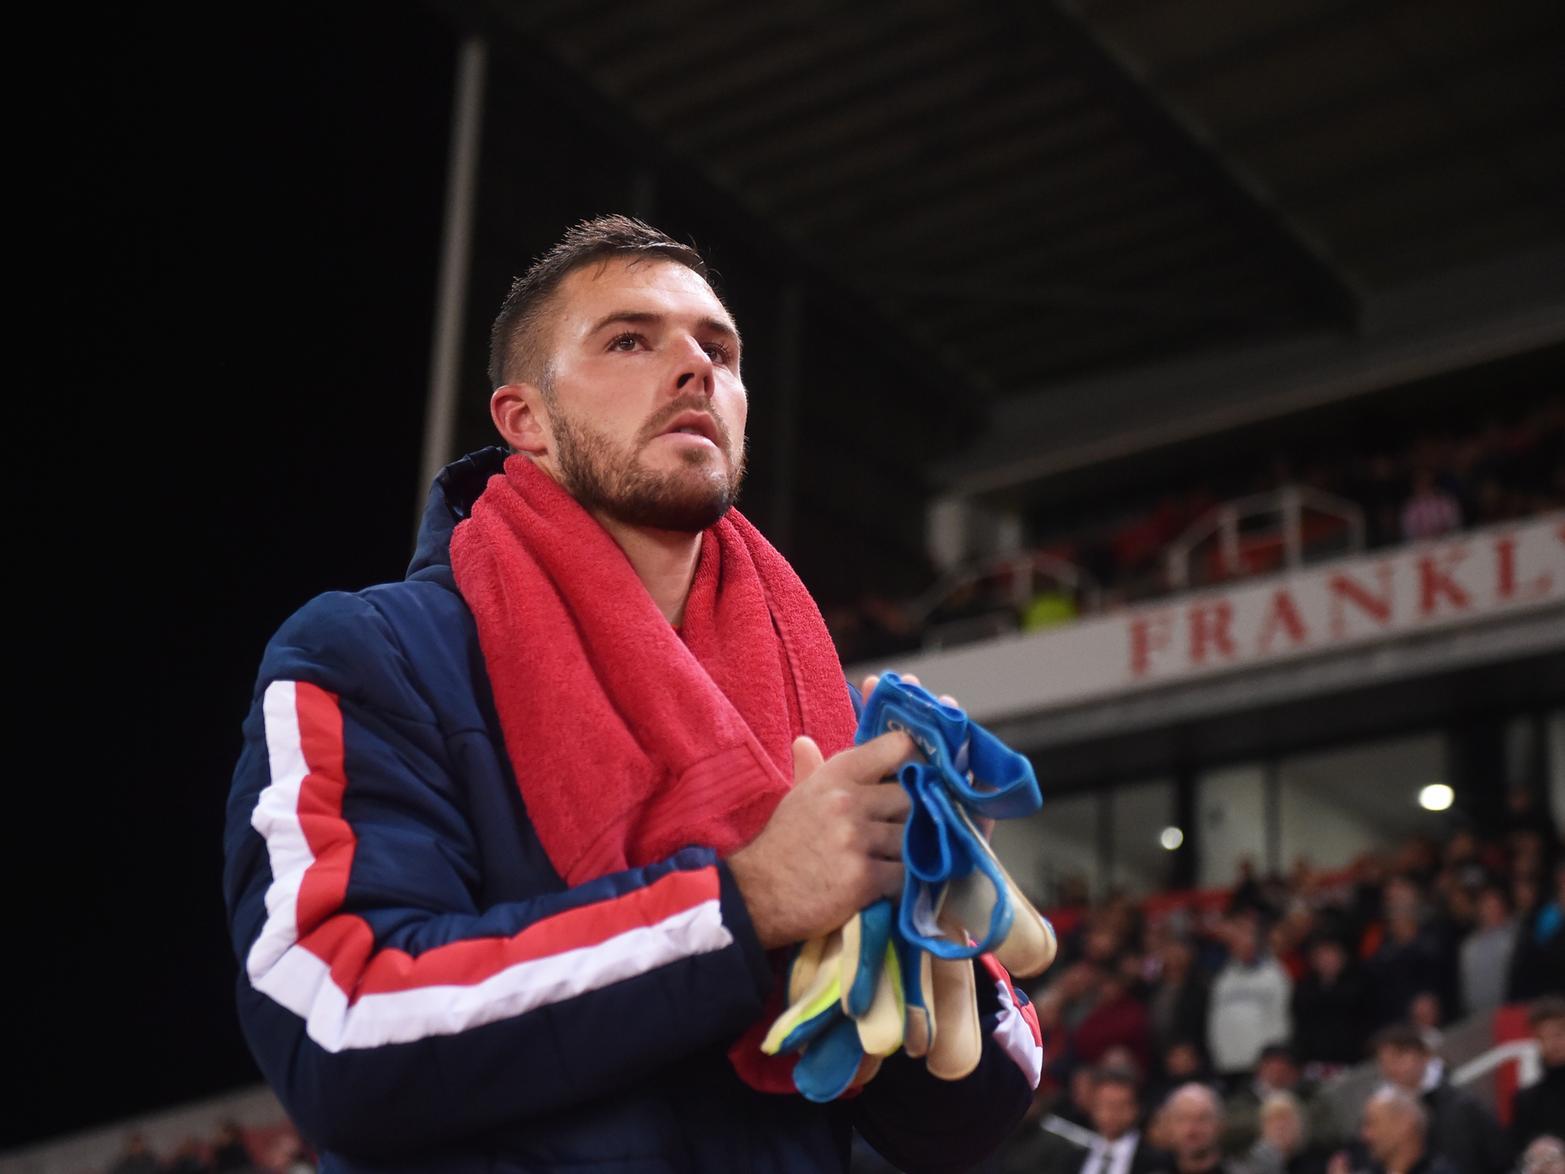 Norwich City have emerged as a potential destination for Stoke City Jack Butland, who is said to be desperate to secure a move to the Premier League to help his chances of making Euro 2020. (Stoke Sentinel)